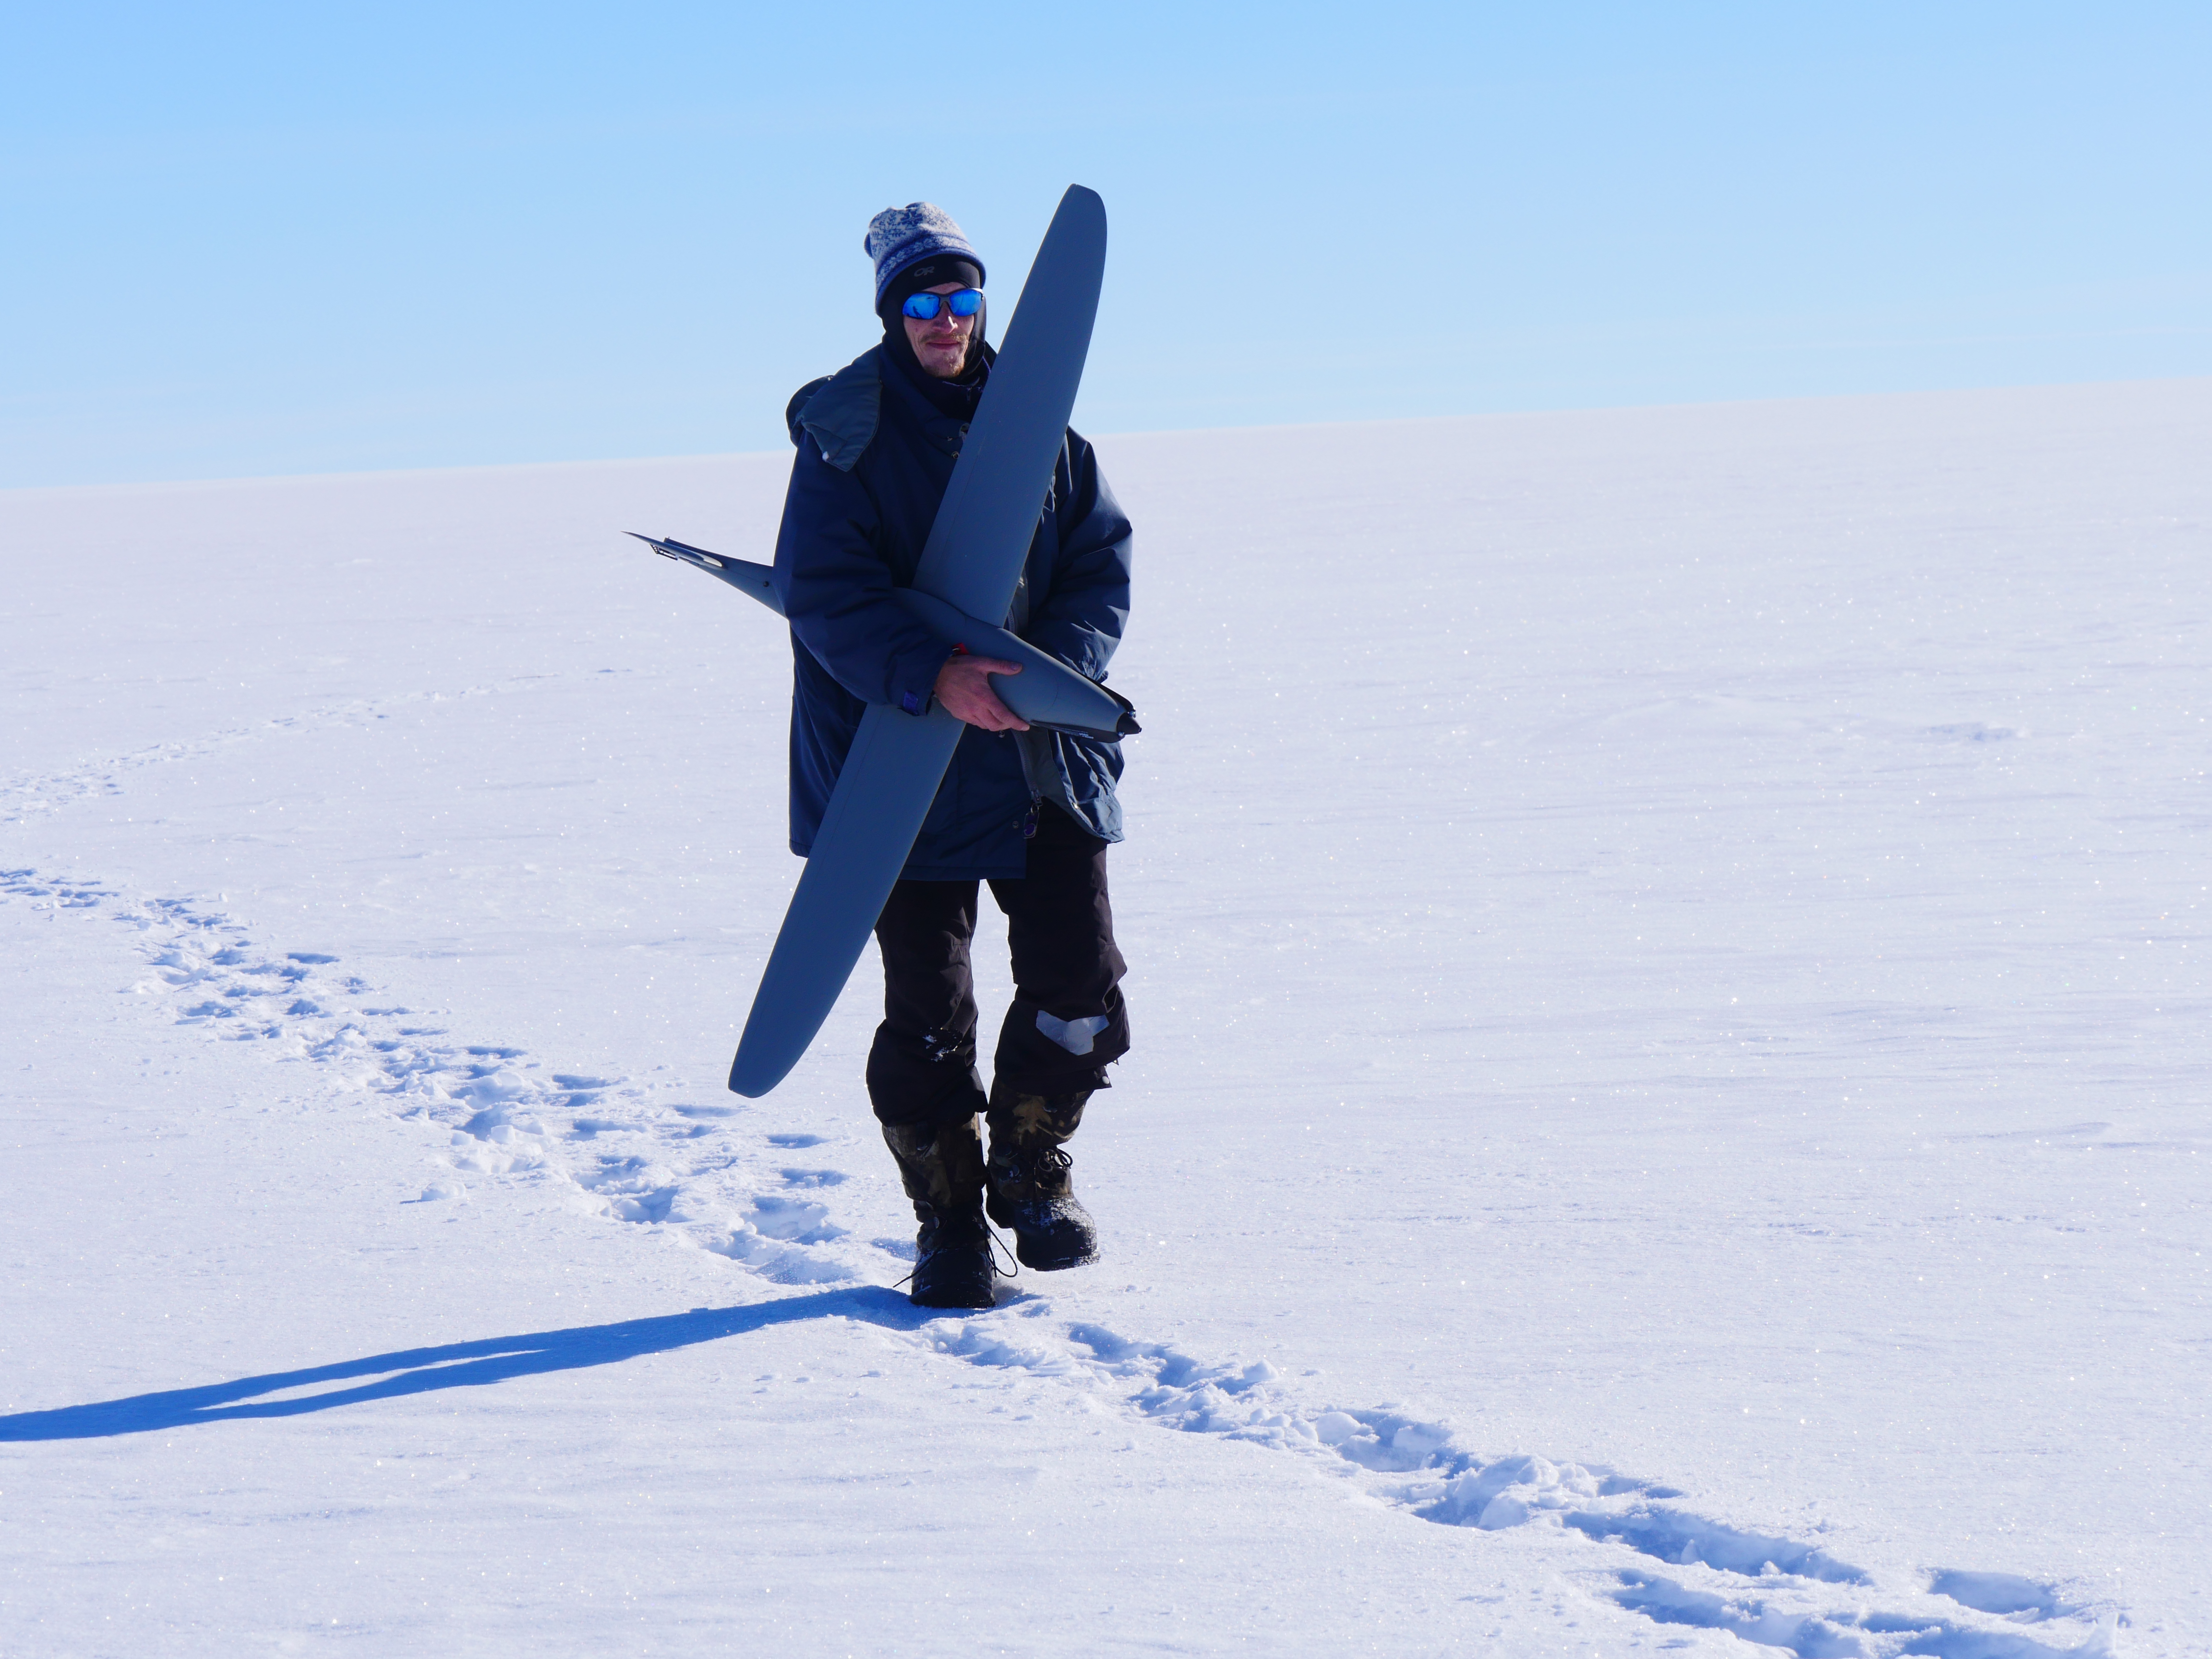 Aslak is walking the drone back after a successful measurement flight.